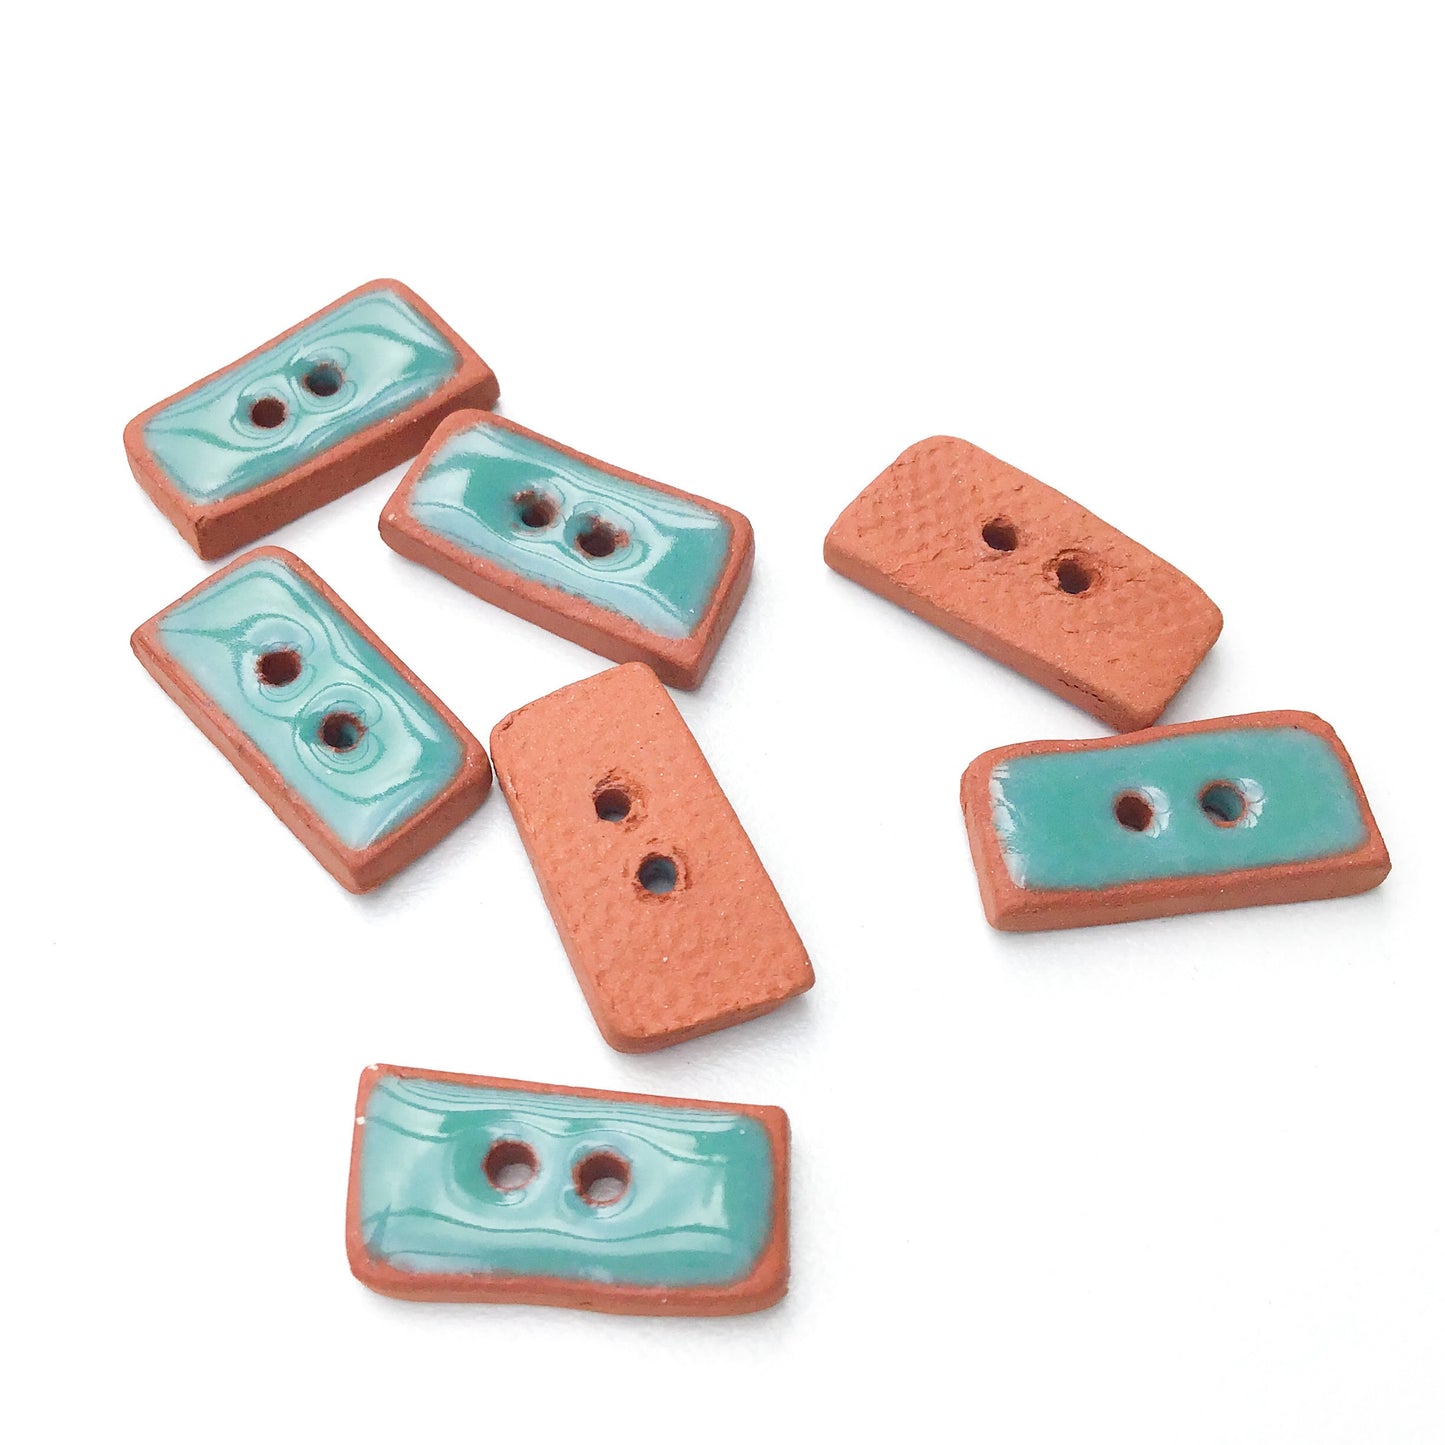 Turquoise Colored Buttons on Red Clay - Turquoise Ceramic Buttons - 3/8" x 3/4" - 7 Pack (ws-255)